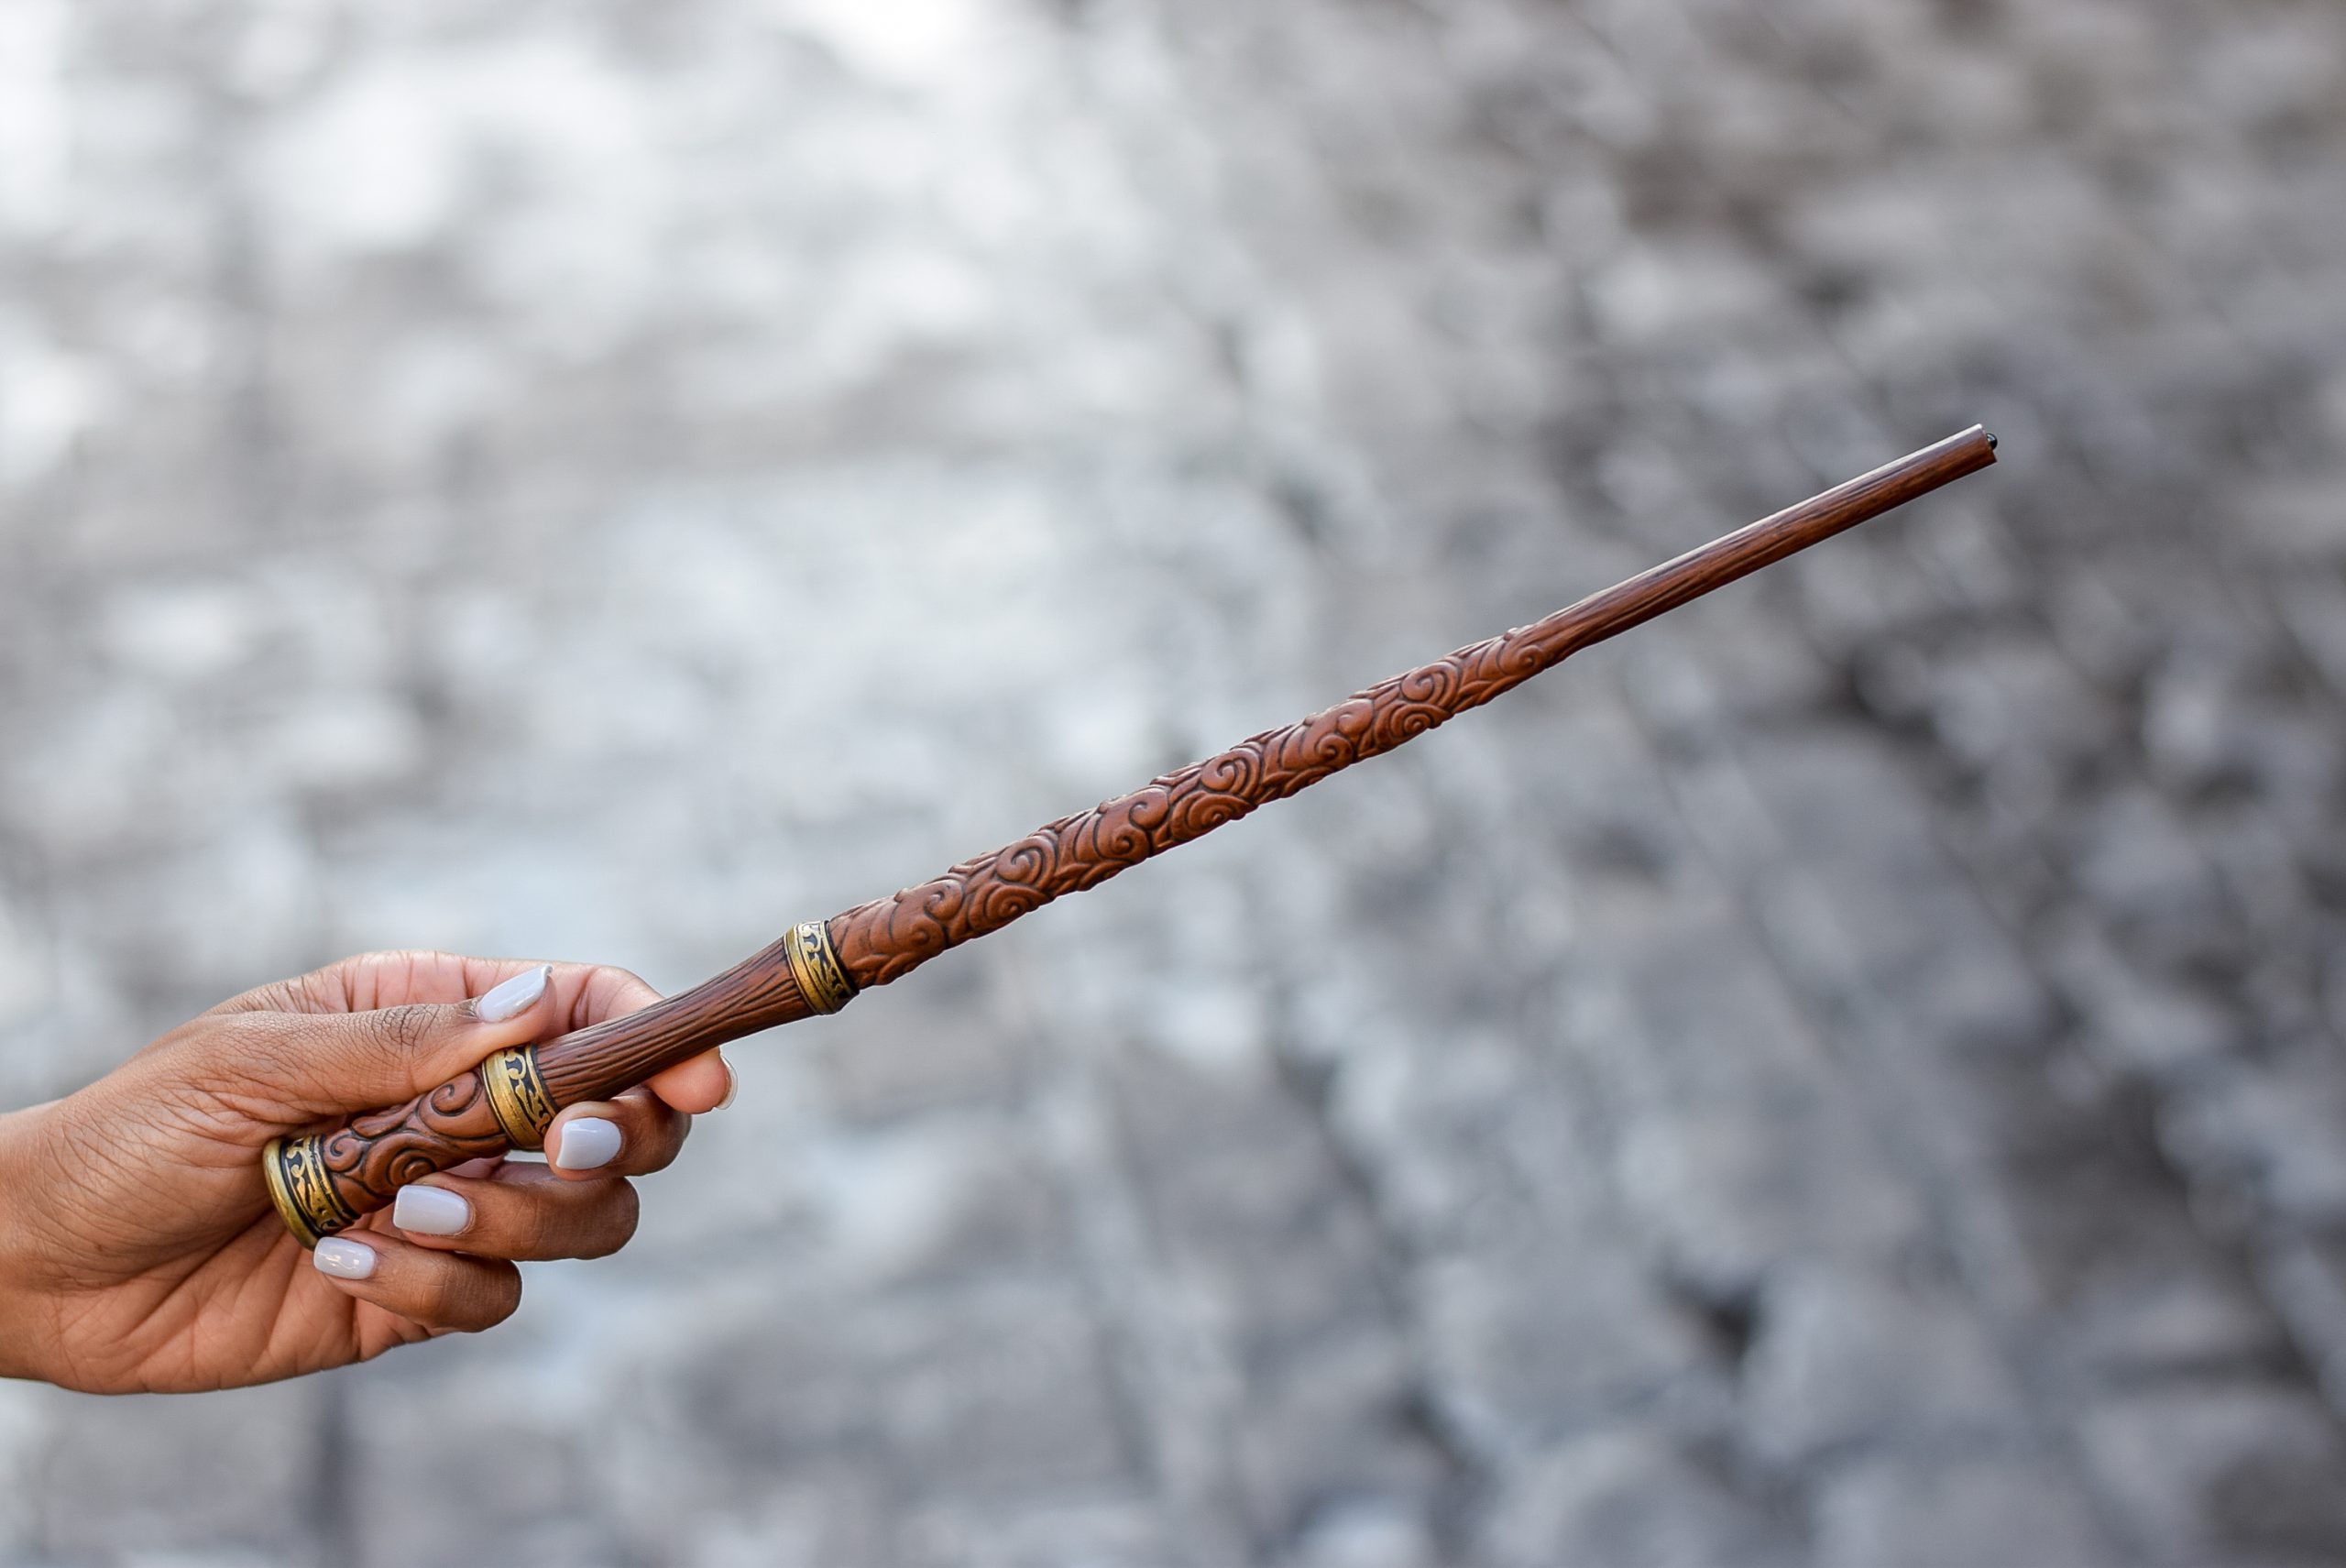 13 NEW Interactive Harry Potter Wands Now Available at Universal Orlando! -  